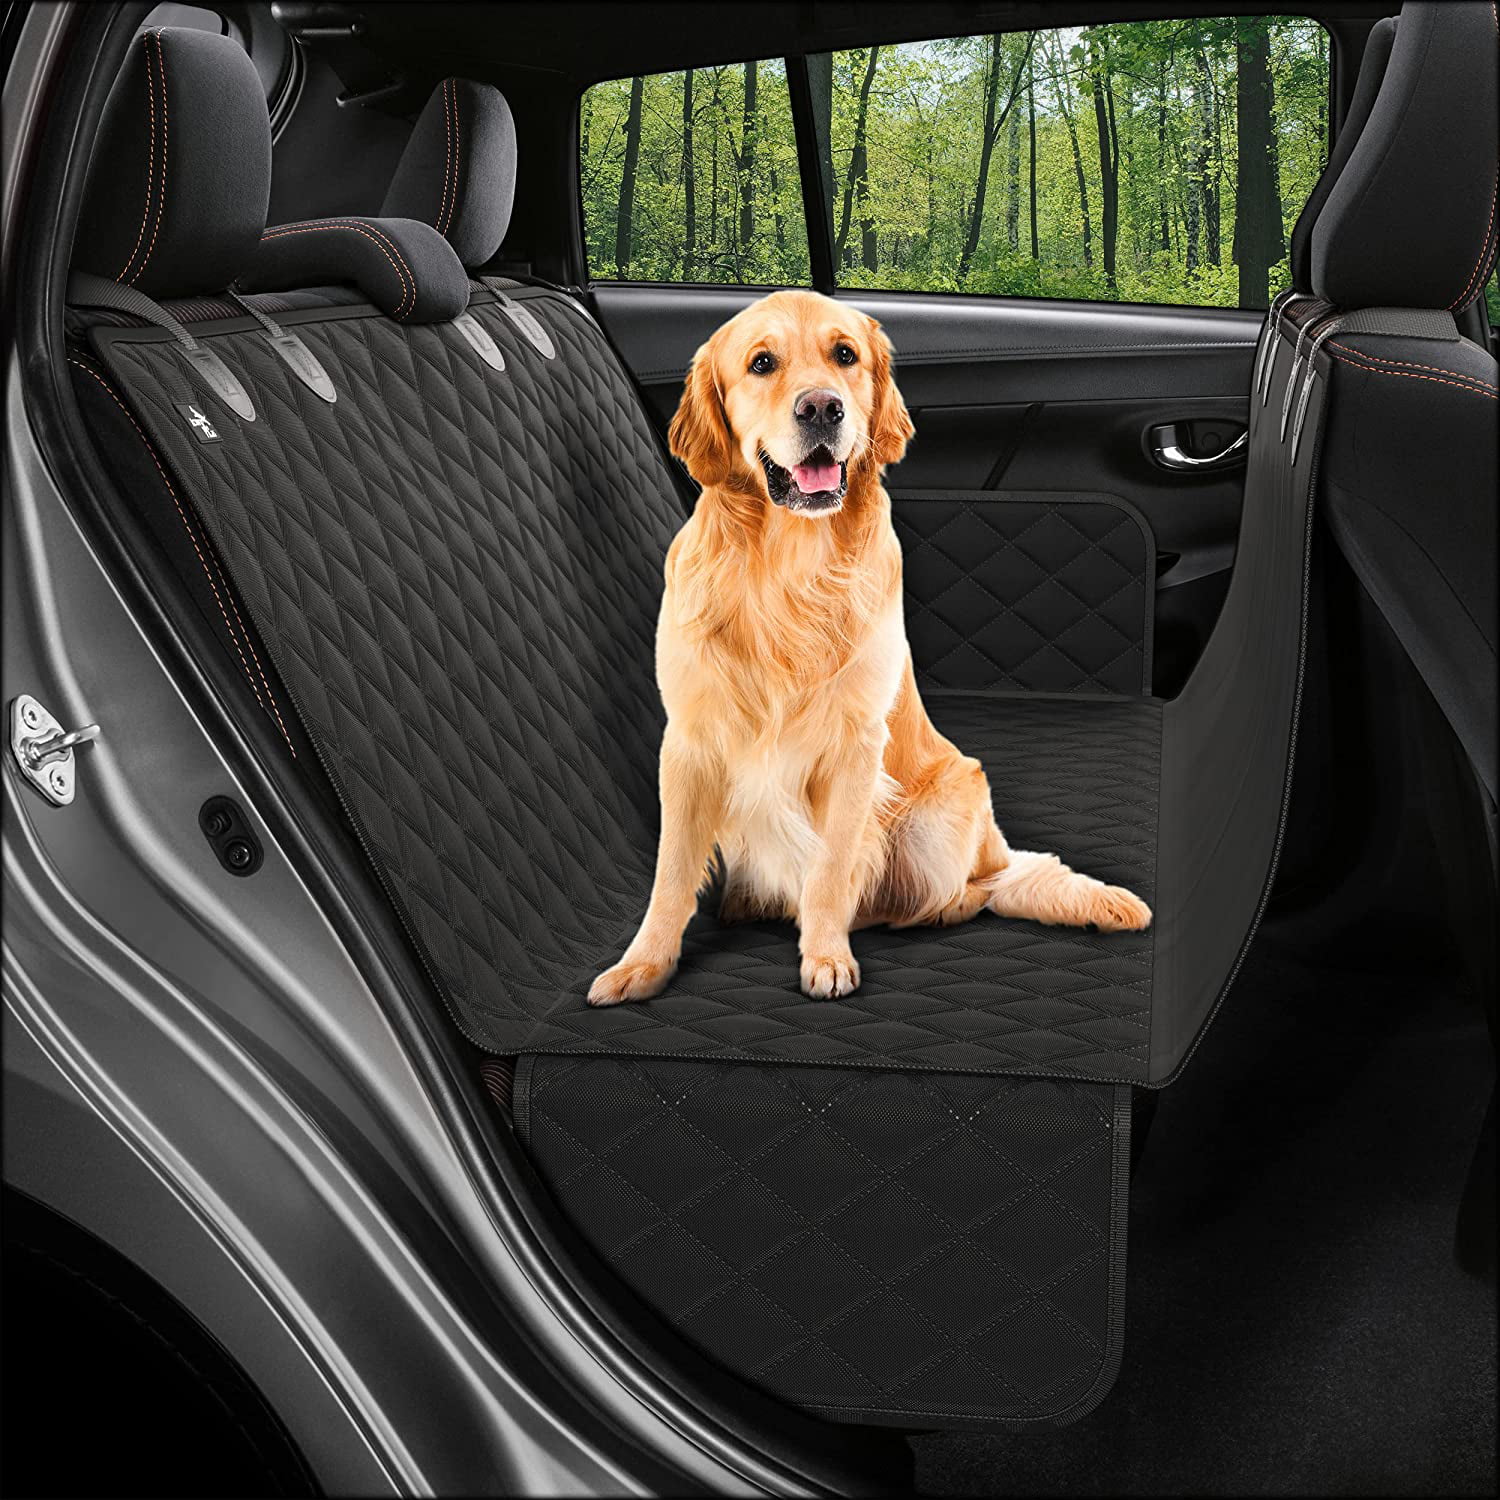 Waterproof & Nonslip Dog Car Seat Cover & Dog Bowl & Pet Seat Belt Dog Travel Hammock with Seat Anchors for All Cars 